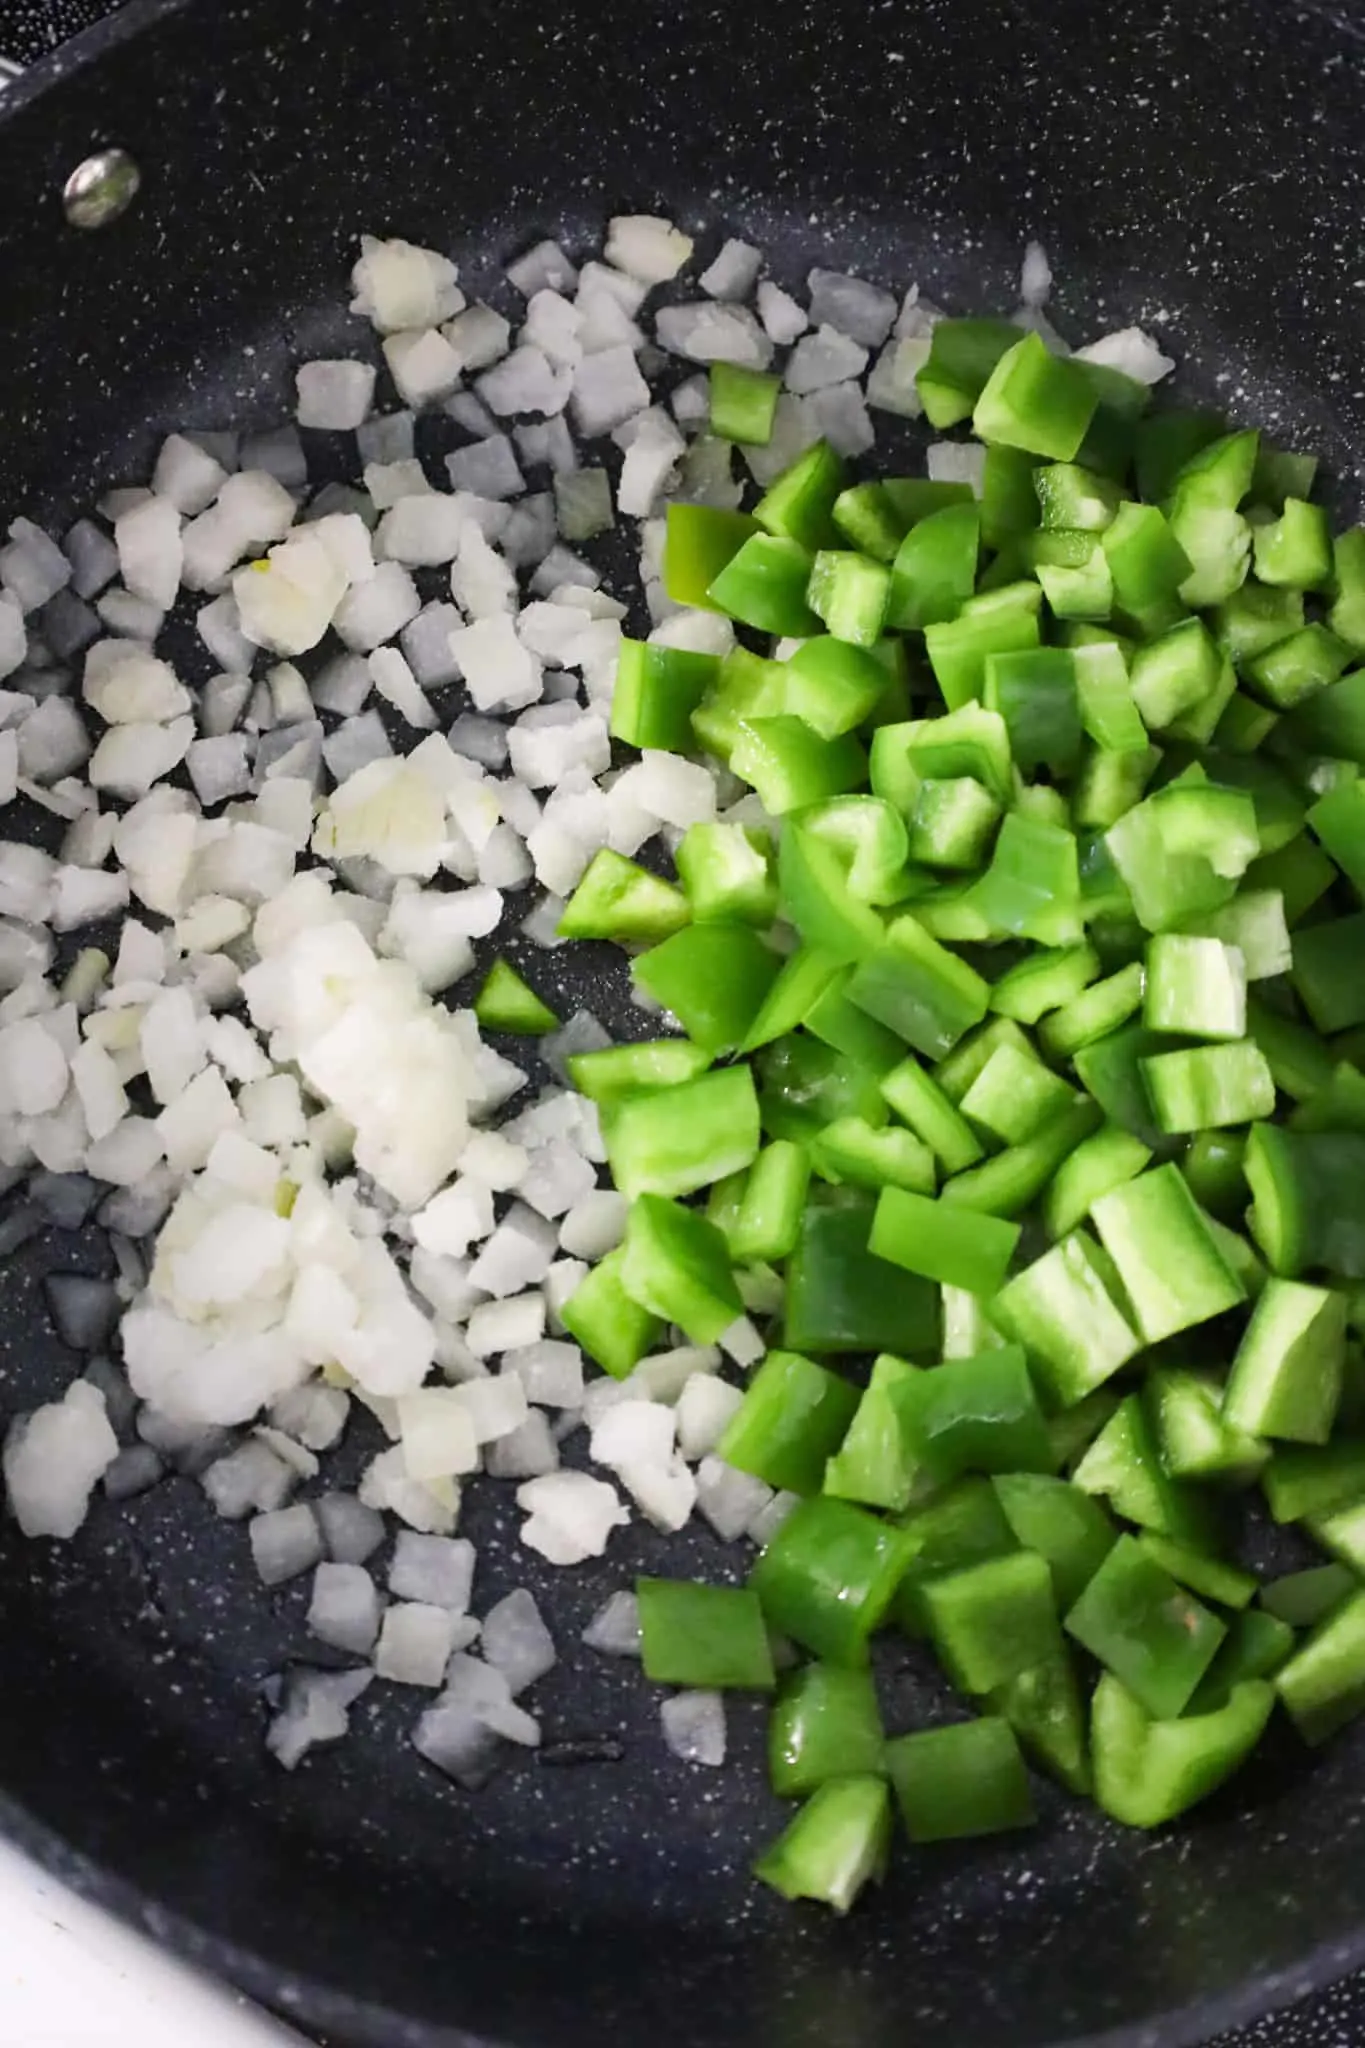 diced onions and diced green peppers in a skillet